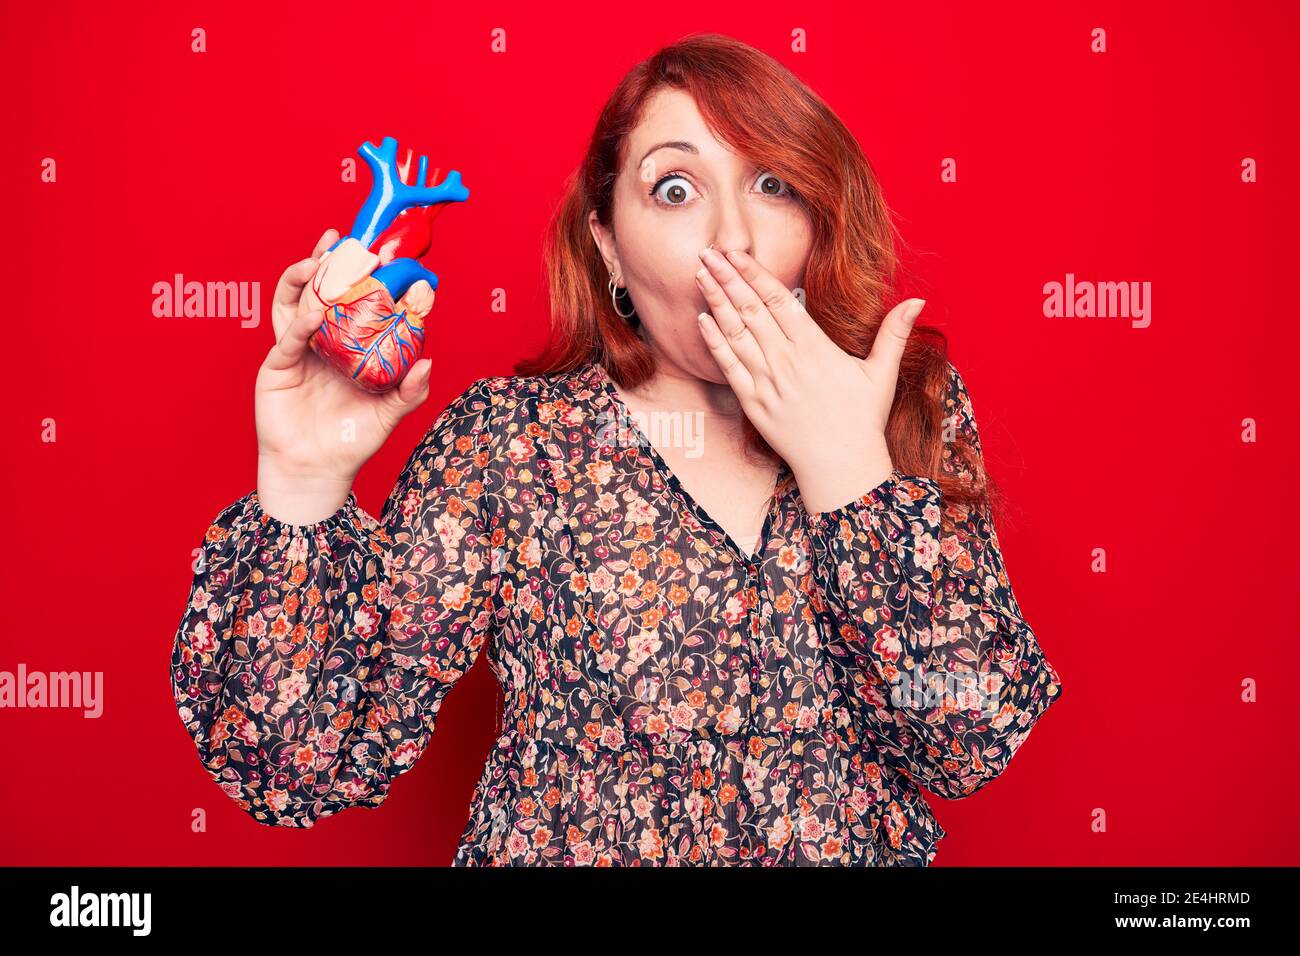 Young beautiful redhead woman asking for health care holding heart over read background covering mouth with hand, shocked and afraid for mistake. Surp Stock Photo